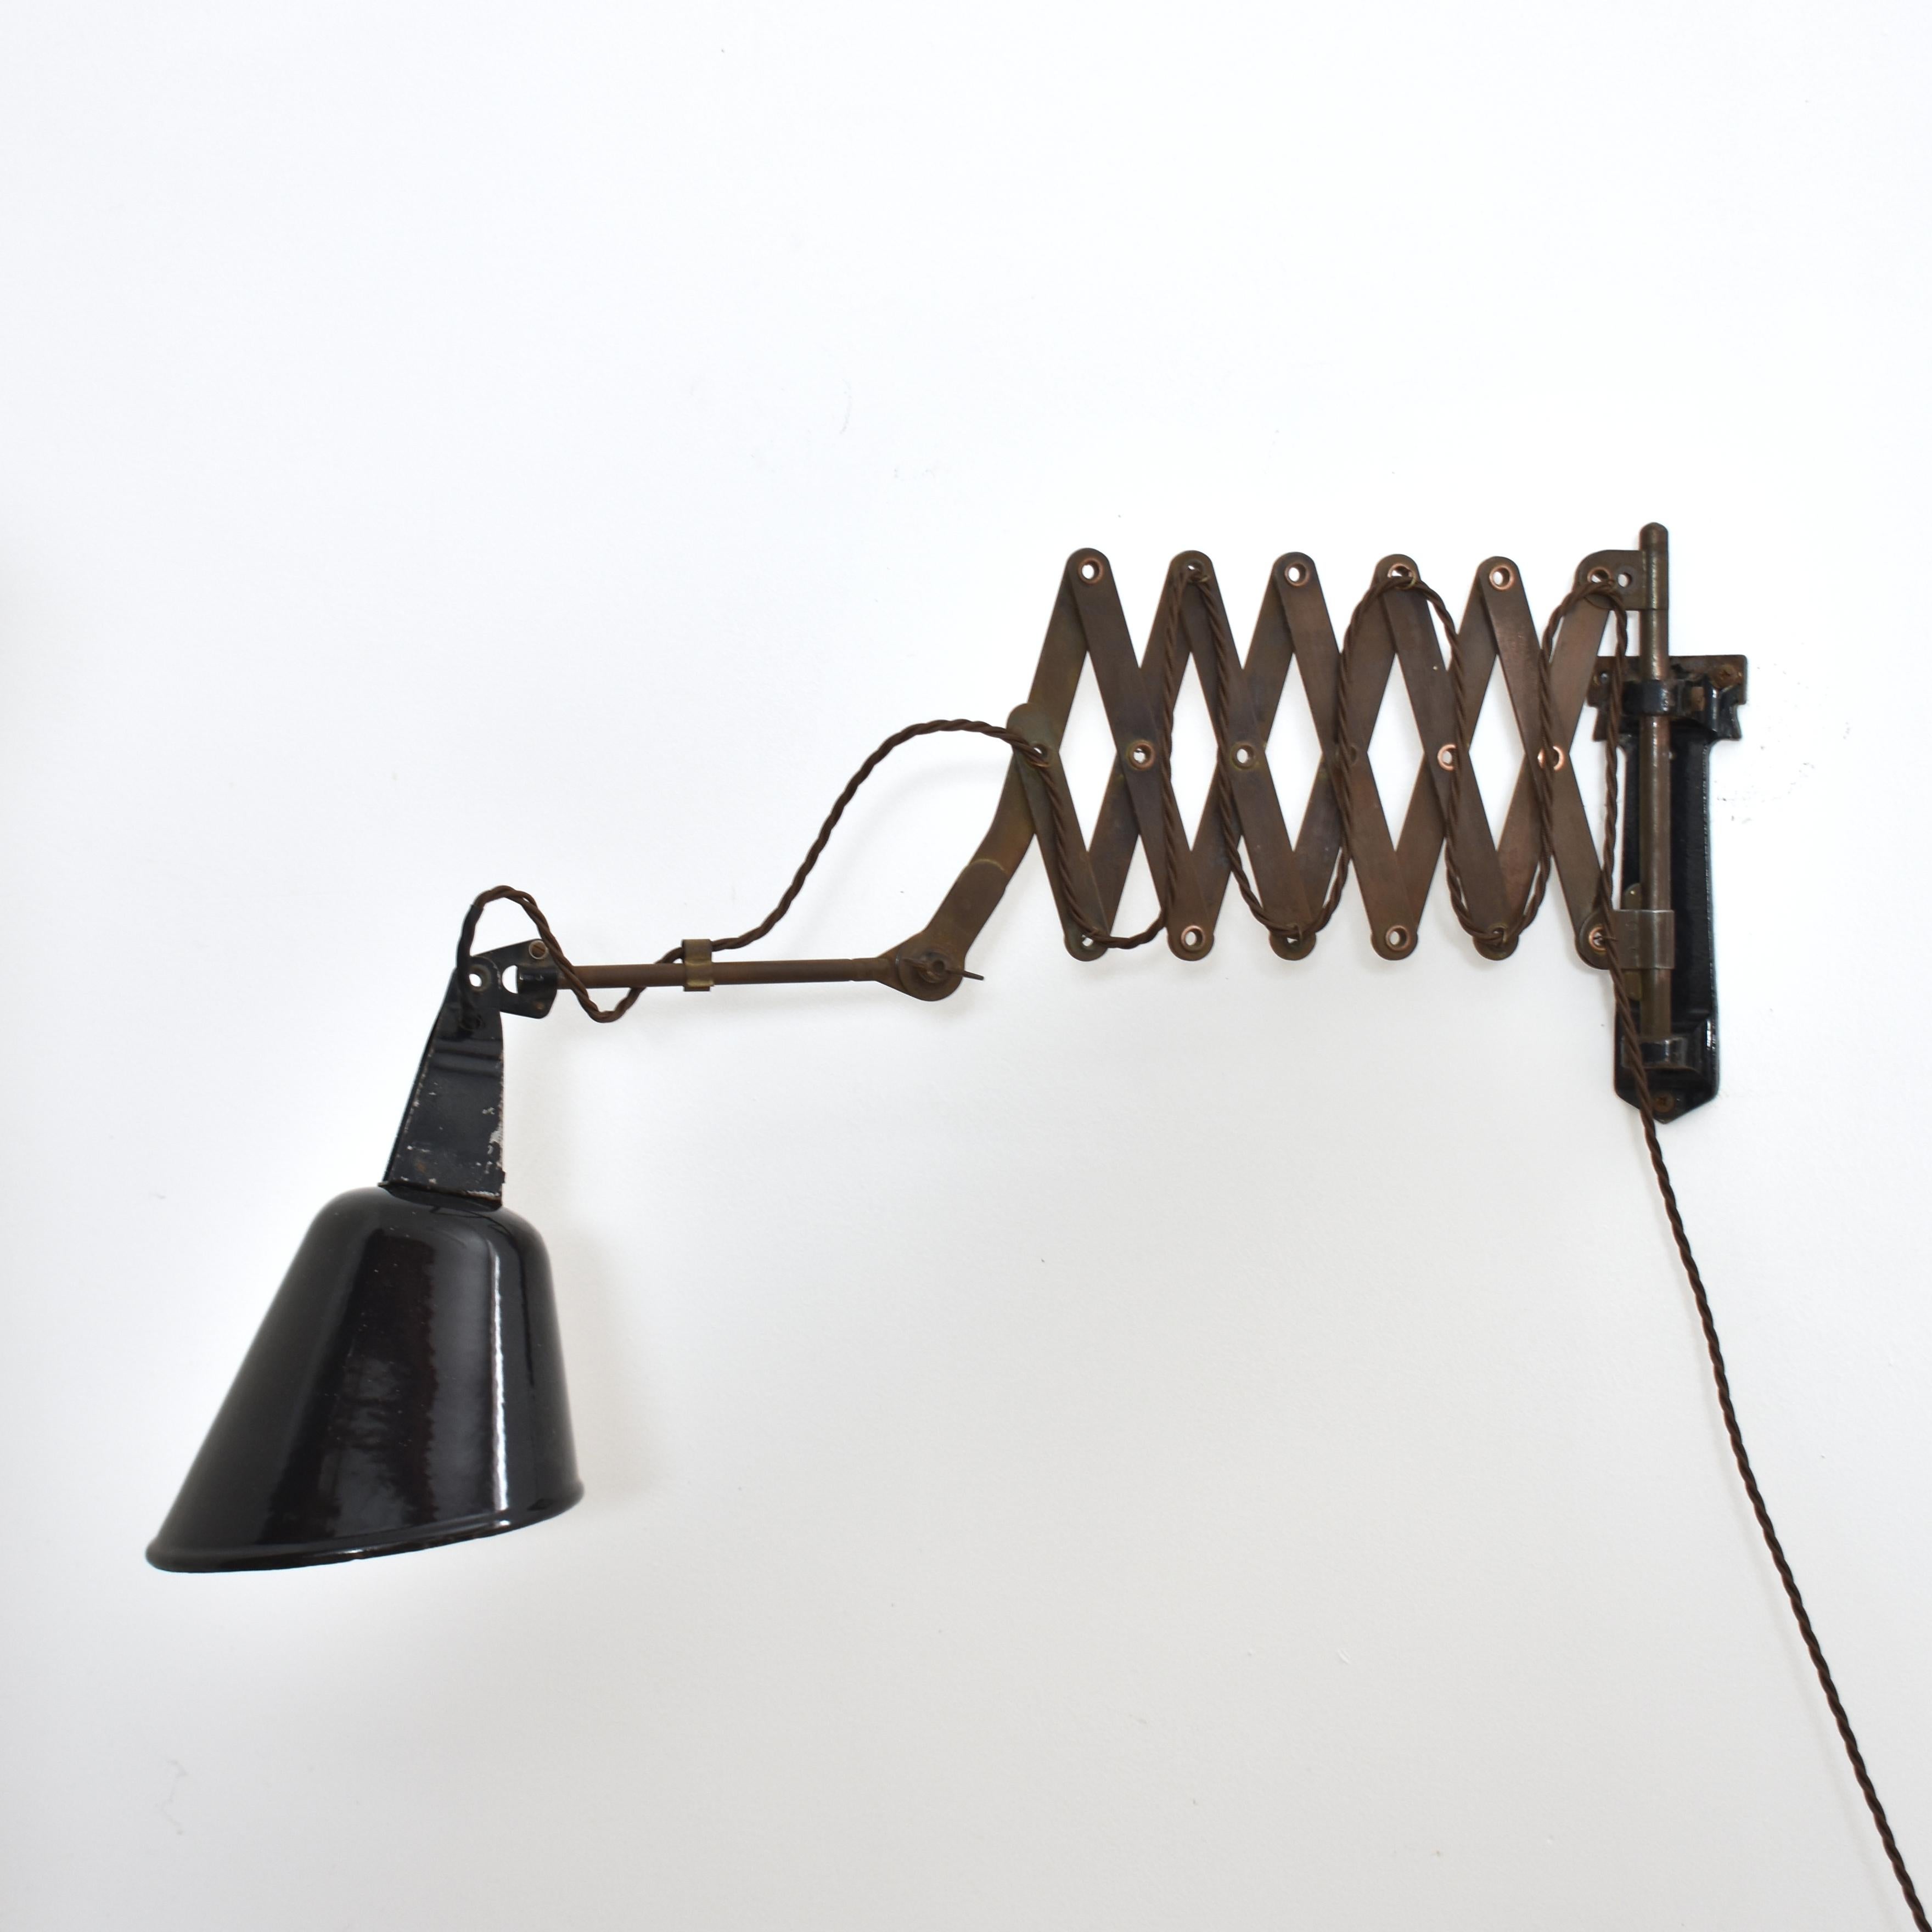 Radialite Vintage Scissor Wall Light By Walligraph

A vintage scissor wall light with a black aluminium shade. The light has a steel double scissor mechanism which can extend out and in. The shade position can be adjusted with a wing nut. The